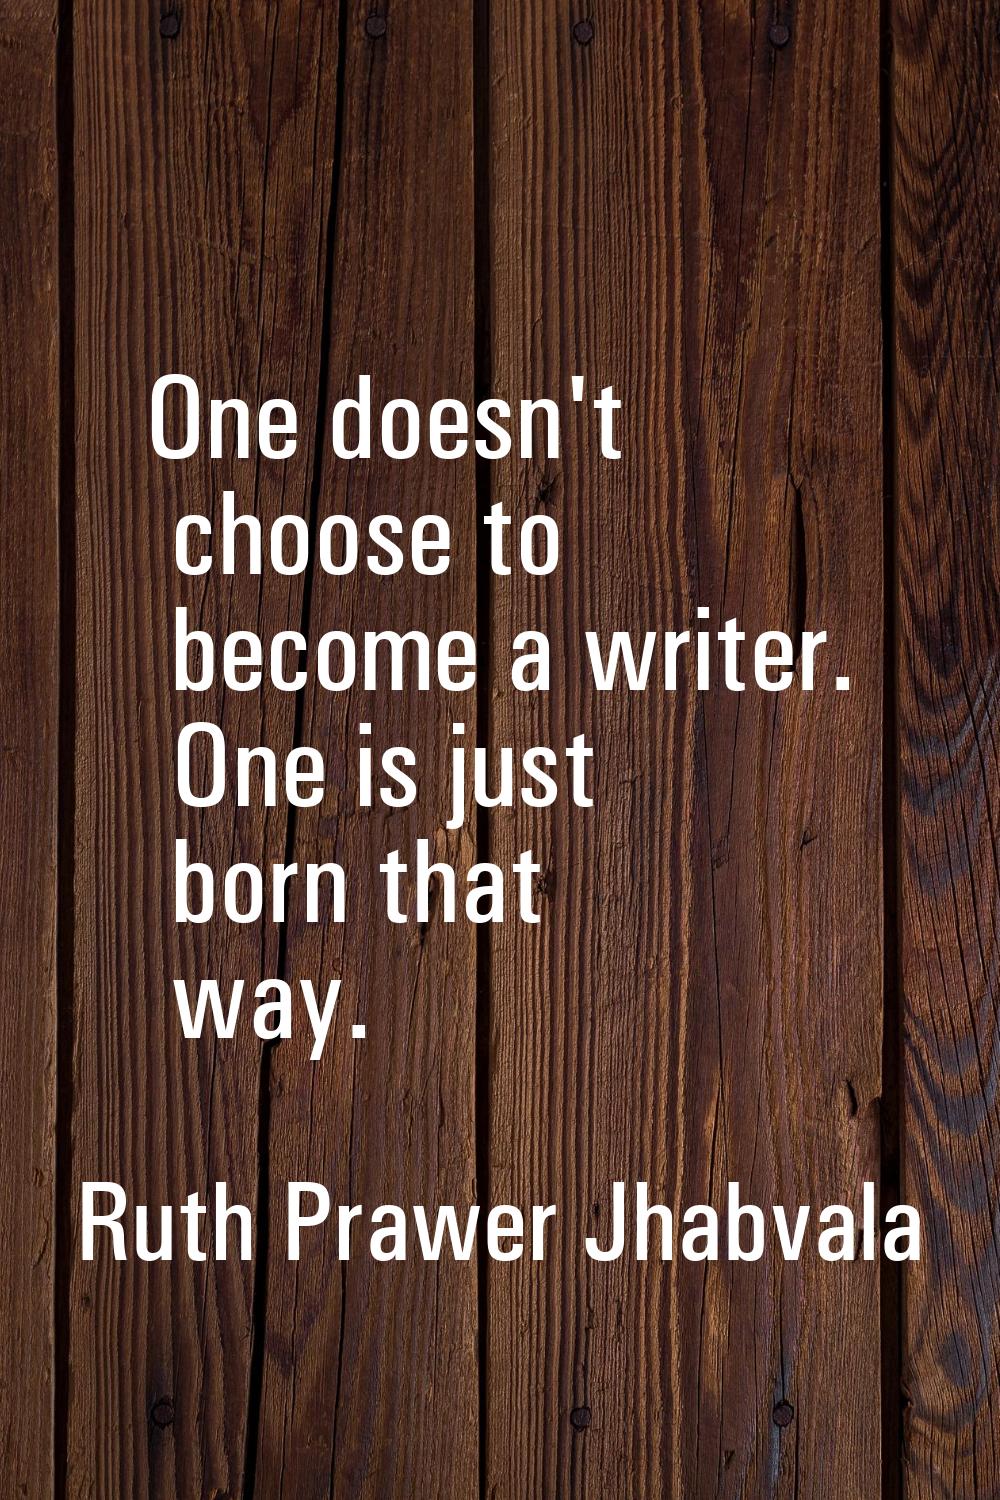 One doesn't choose to become a writer. One is just born that way.